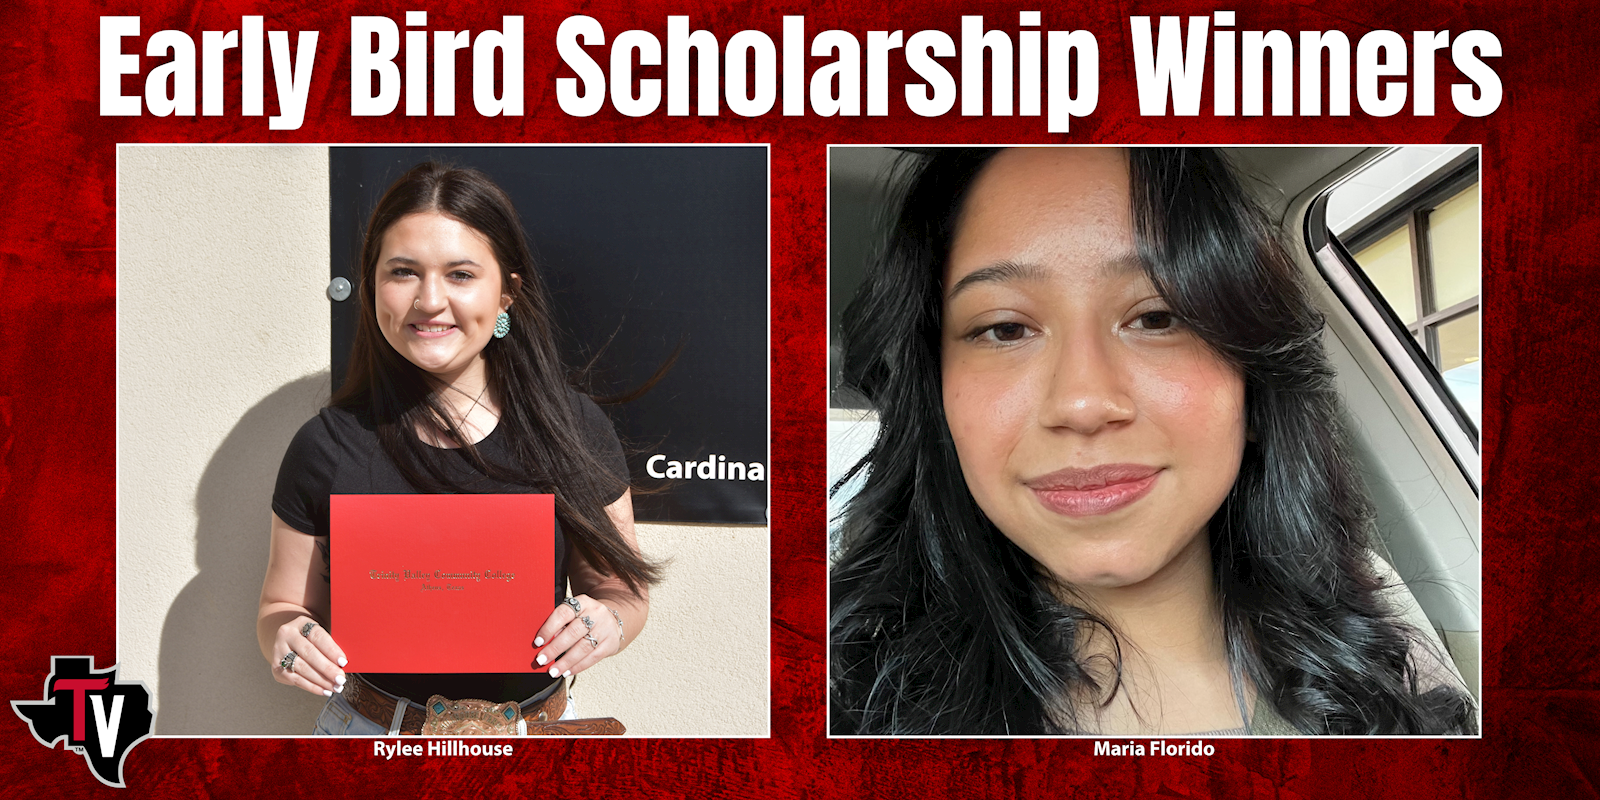 TVCC Advising Center is excited to announce the two winners of the Early Bird Scholarship drawing: Rylee Hillhouse and Maria Florido.       